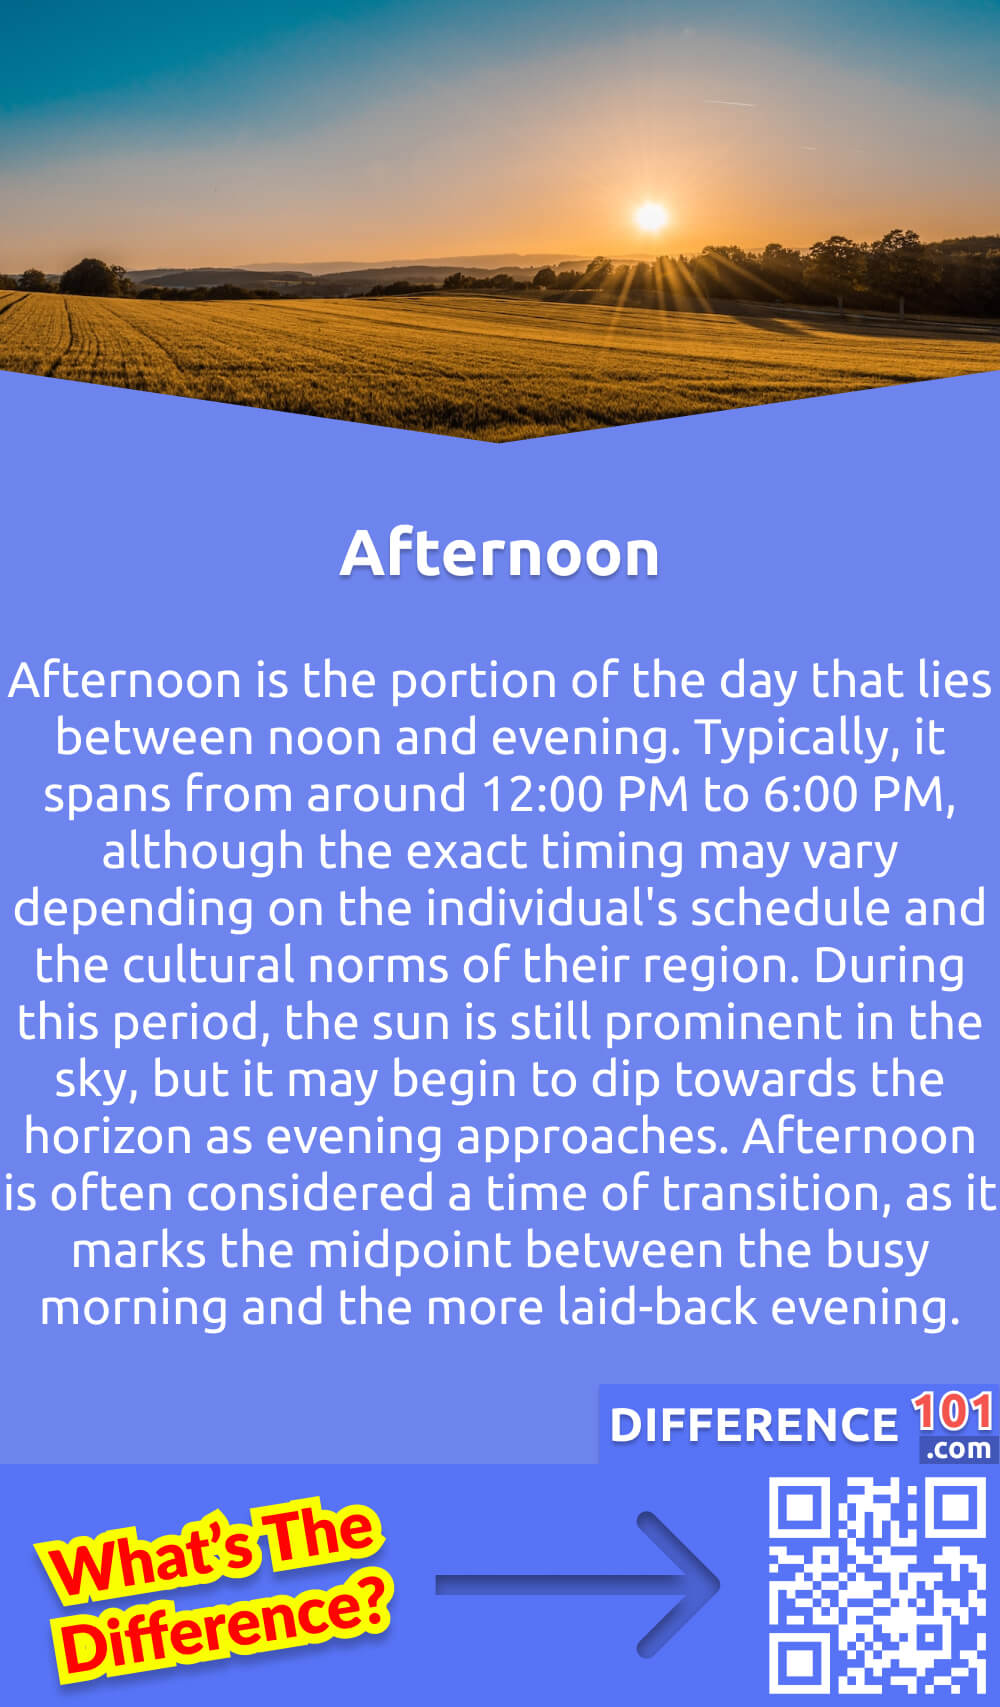 What Is Afternoon? Afternoon is the portion of the day that lies between noon and evening. Typically, it spans from around 12:00 PM to 6:00 PM, although the exact timing may vary depending on the individual's schedule and the cultural norms of their region. During this period, the sun is still prominent in the sky, but it may begin to dip towards the horizon as evening approaches. Afternoon is often considered a time of transition, as it marks the midpoint between the busy morning and the more laid-back evening. Many people use this time to recharge and regroup, preparing for the rest of the day ahead.